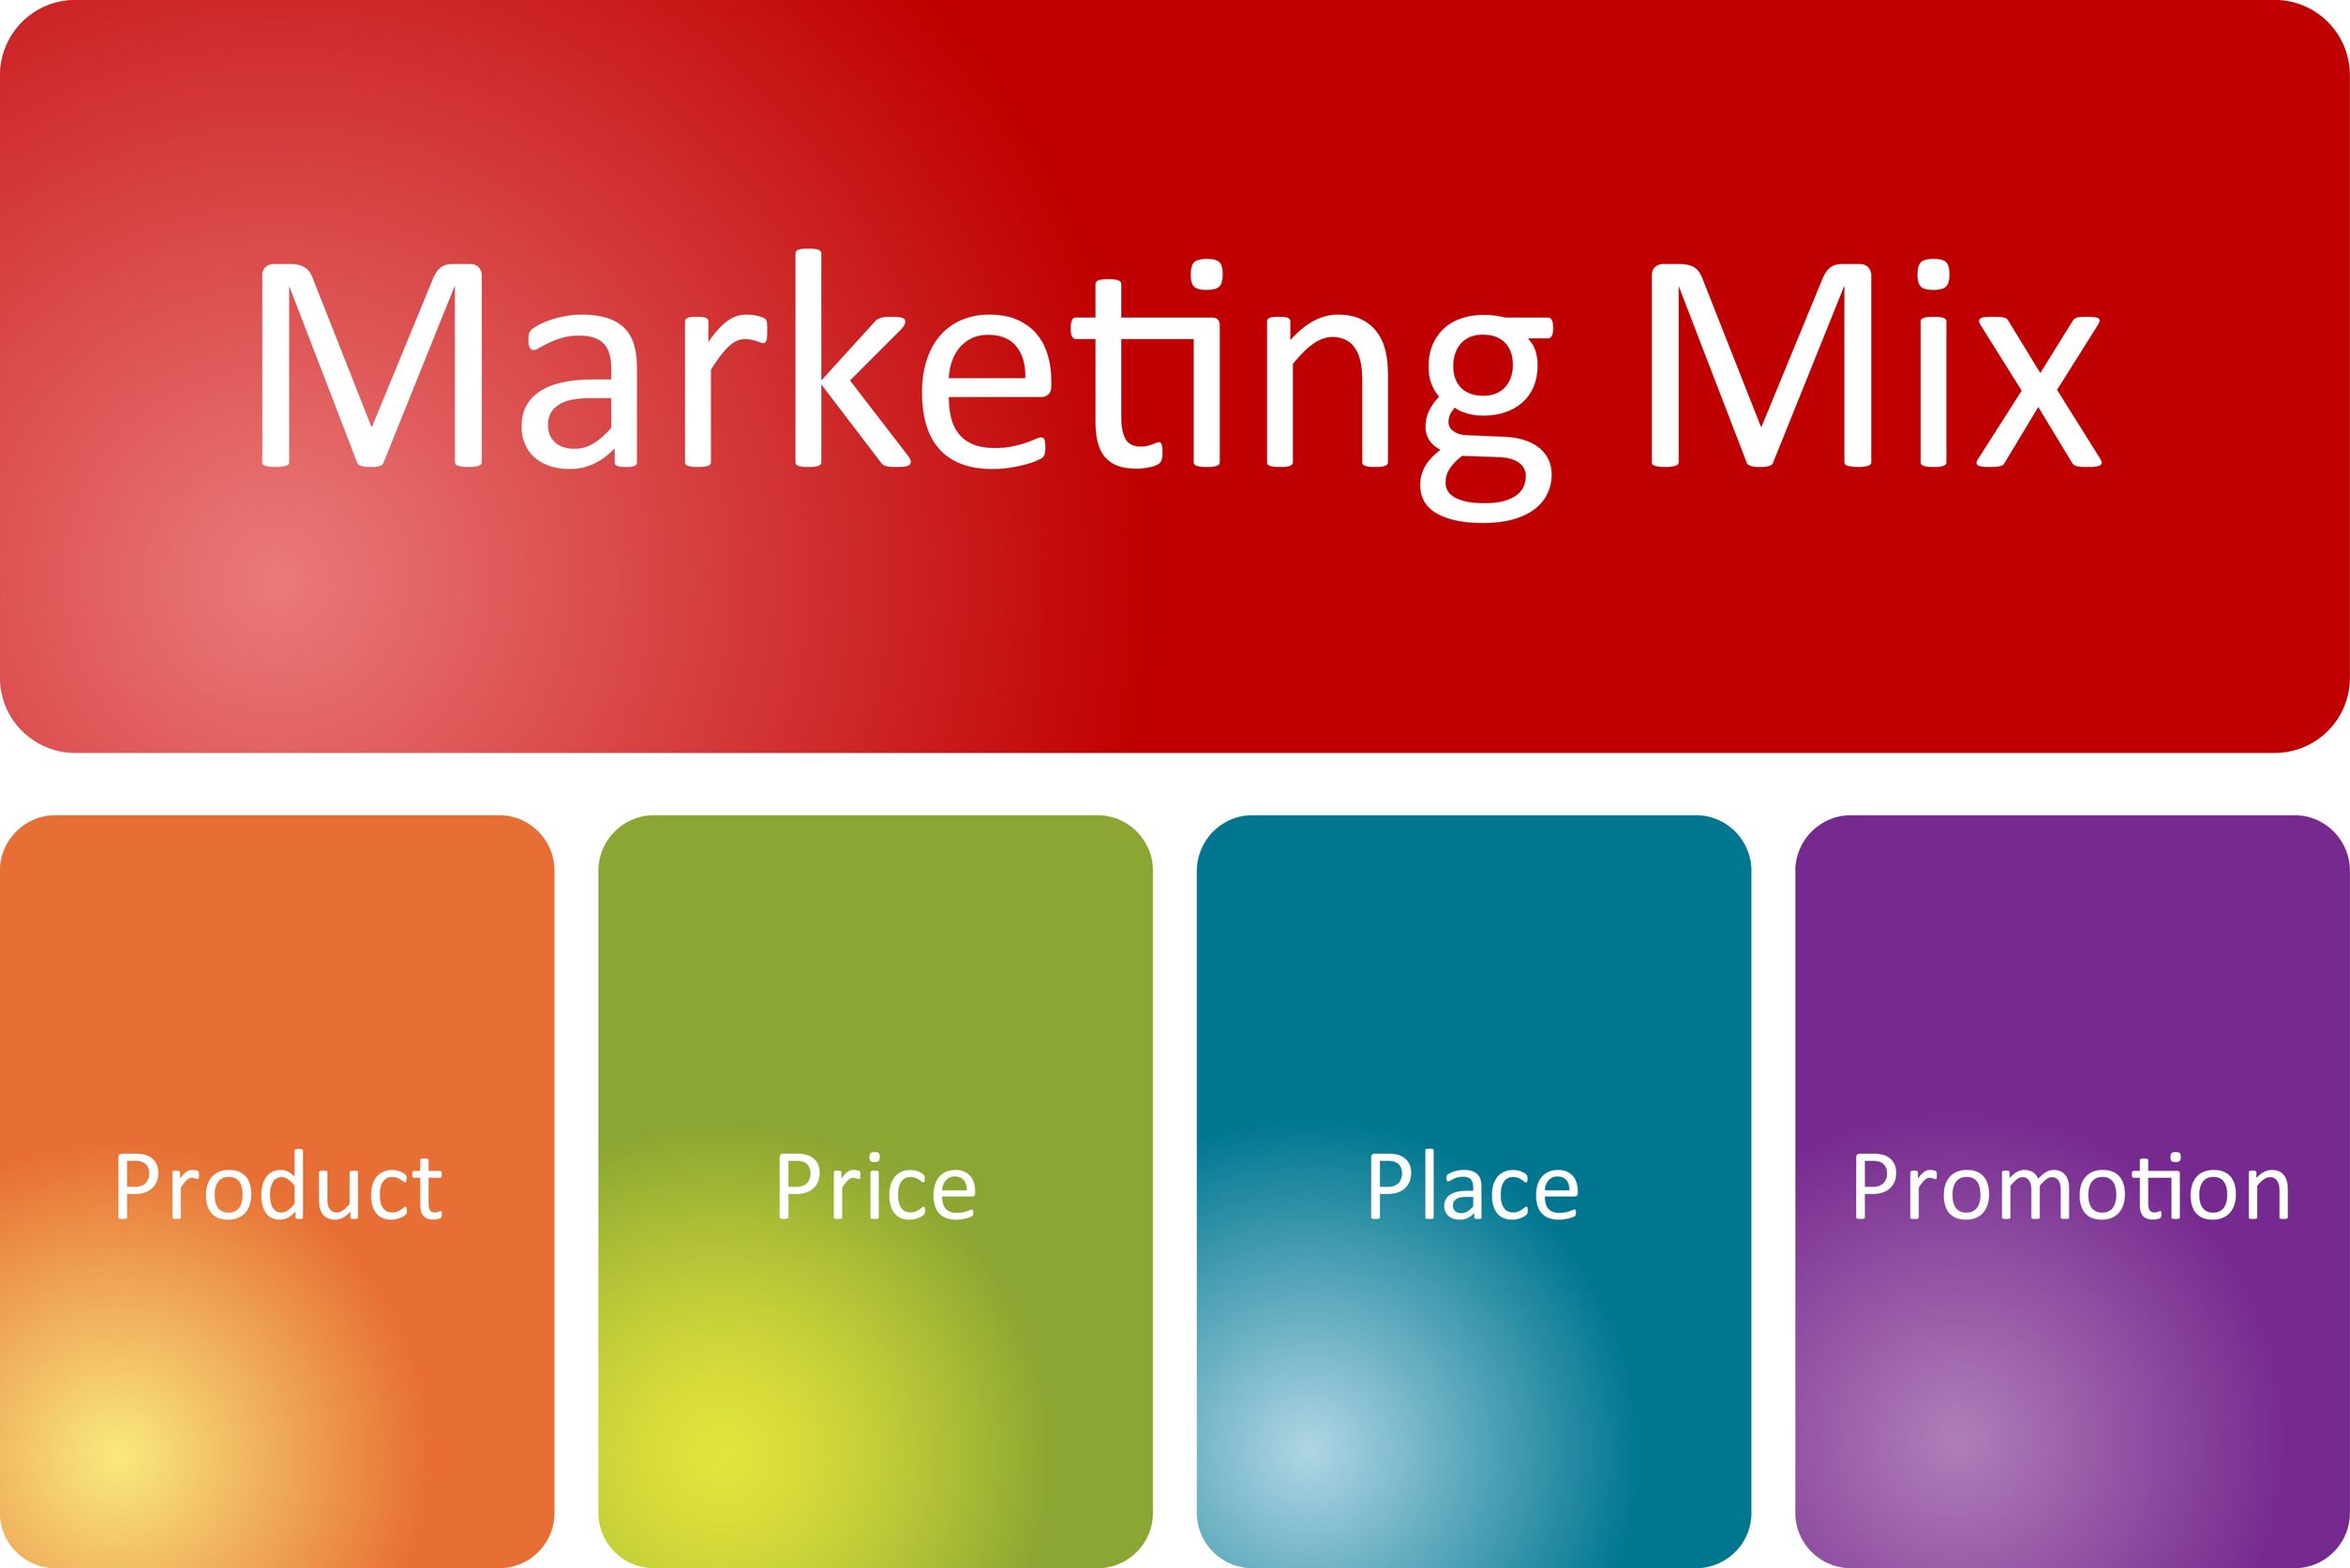 Step 2 â€“ The Marketing Mix | Introduction to the Marketing Mix